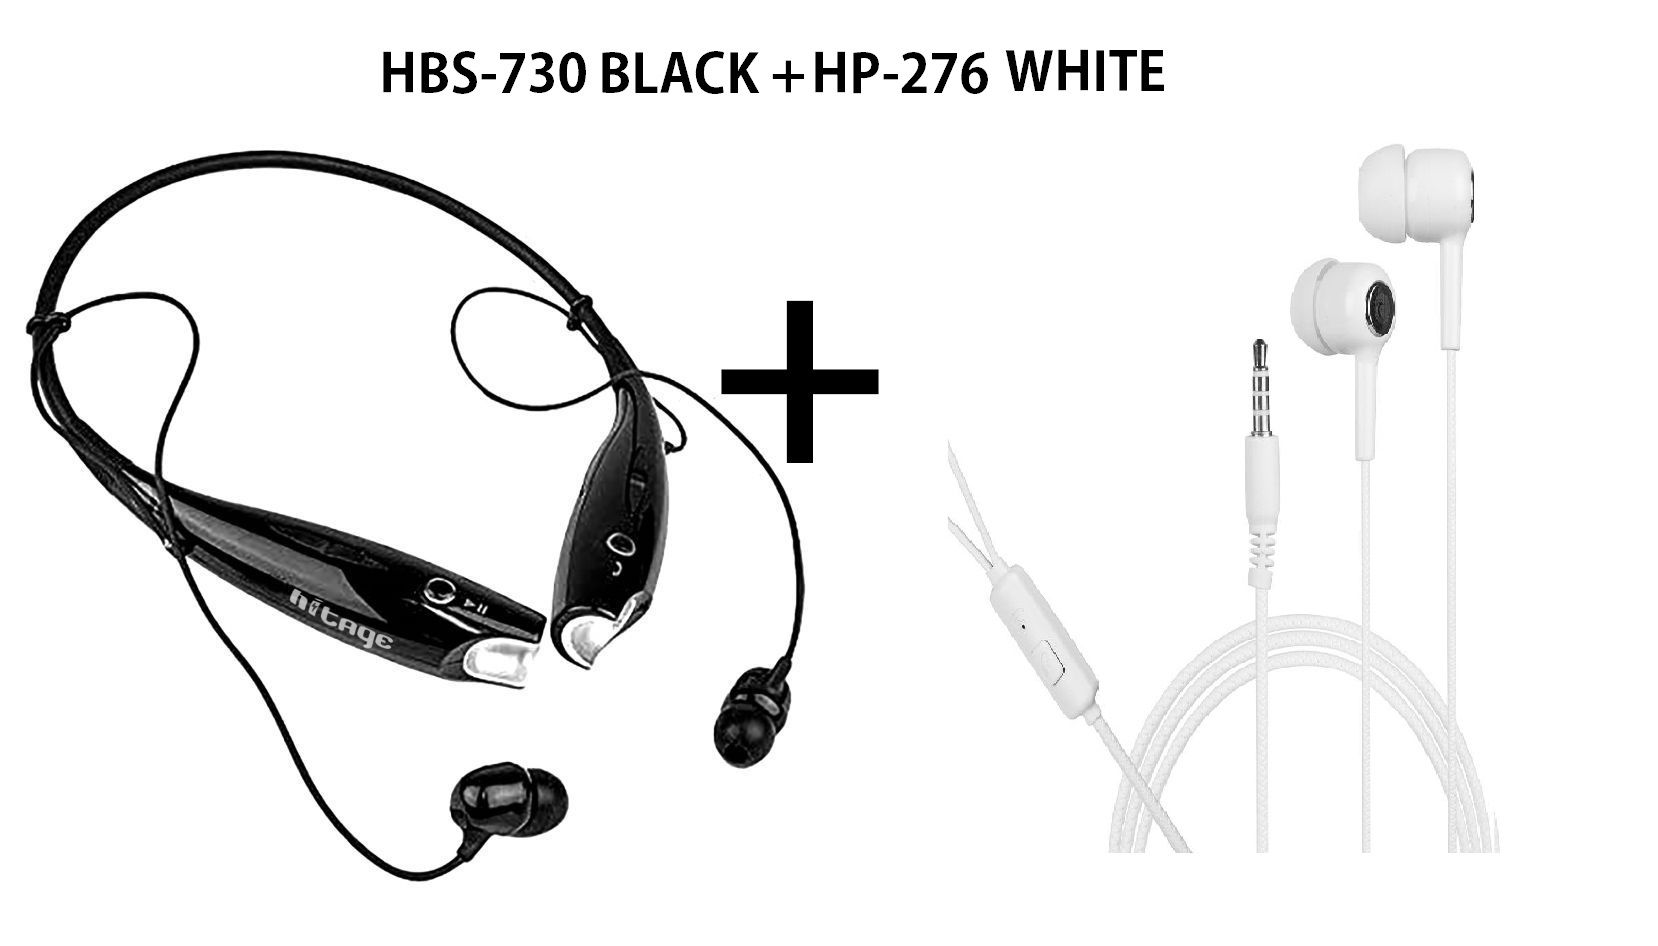 Hitage HBS-730 WITH FREE EARPHONE (15 HOURS Music Playback BATTERY 5.0 Bluetooth ) Wireless SPORT HEADSET Magnetic Neckband With Bass Headphones/Earphones